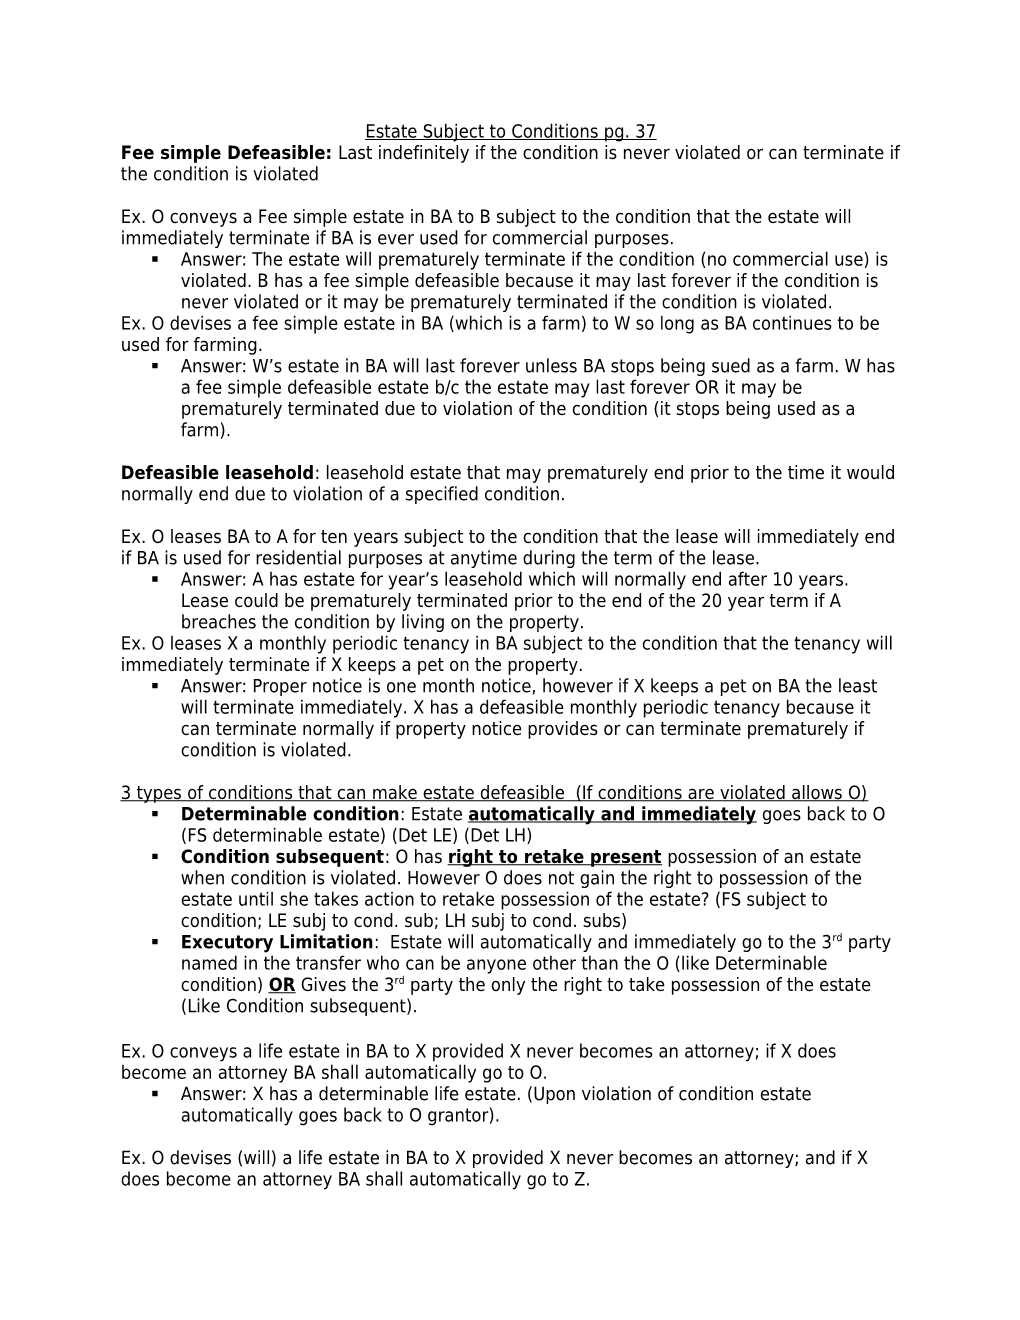 Estate Subject to Conditions Pg. 37